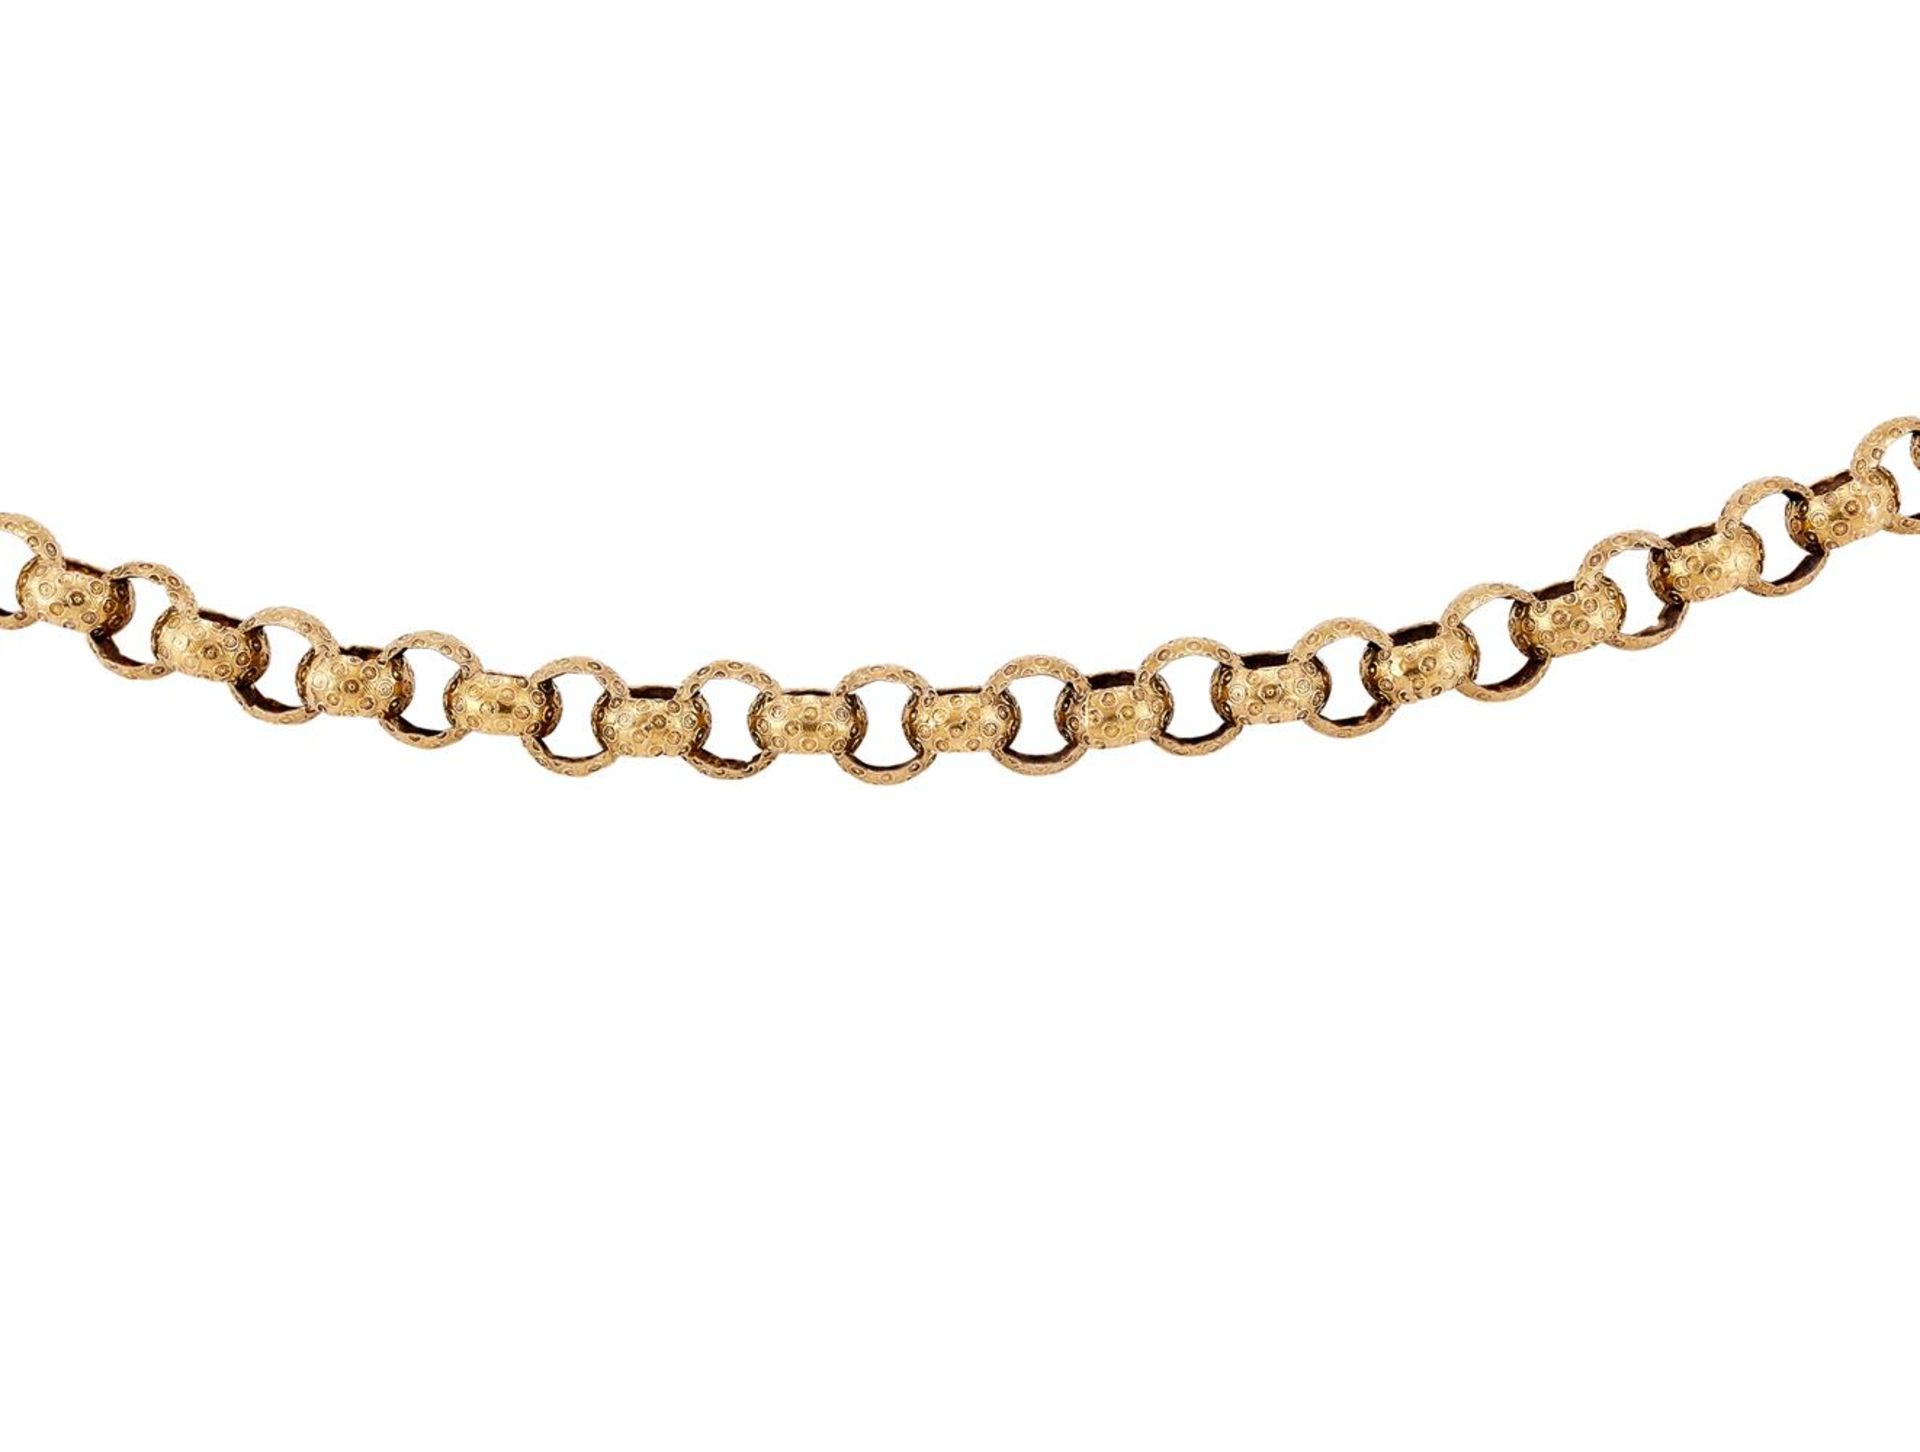 A REGENCY GOLD LONG CHAIN, CIRCA 1820 - Image 2 of 3